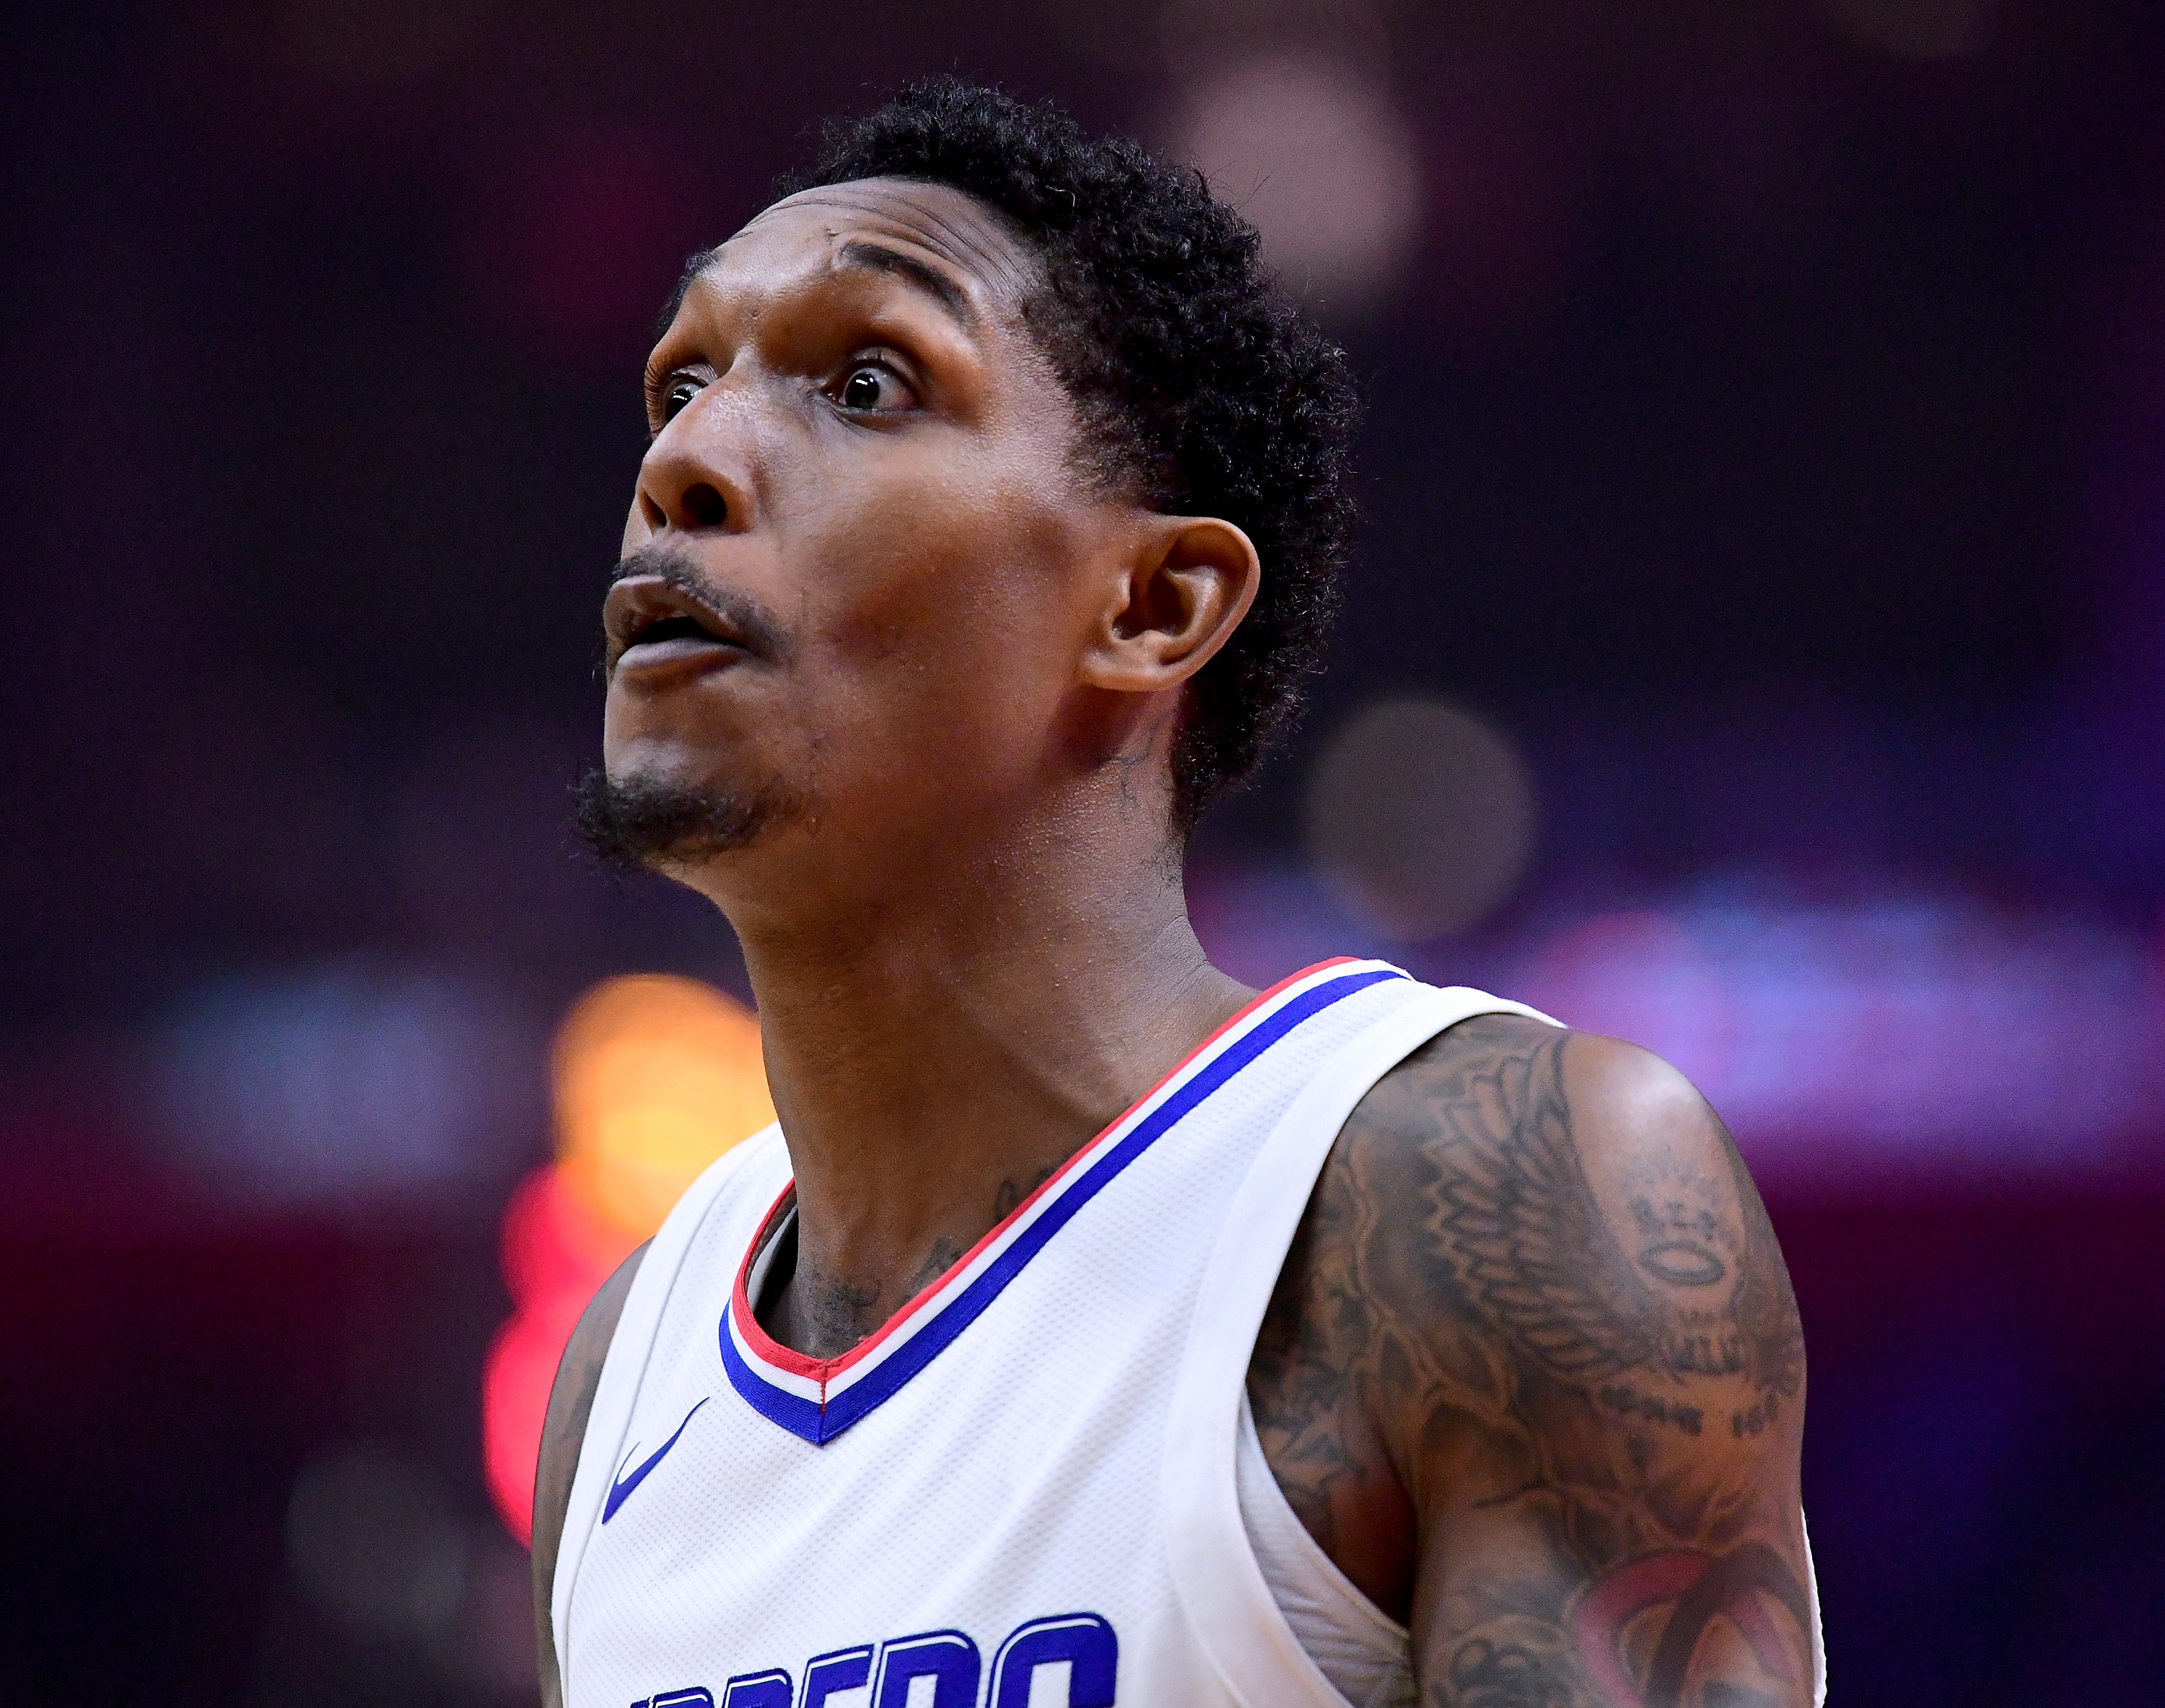 Lou Williams Says Many NBA Players Have Multiple Girlfriends, Shannon